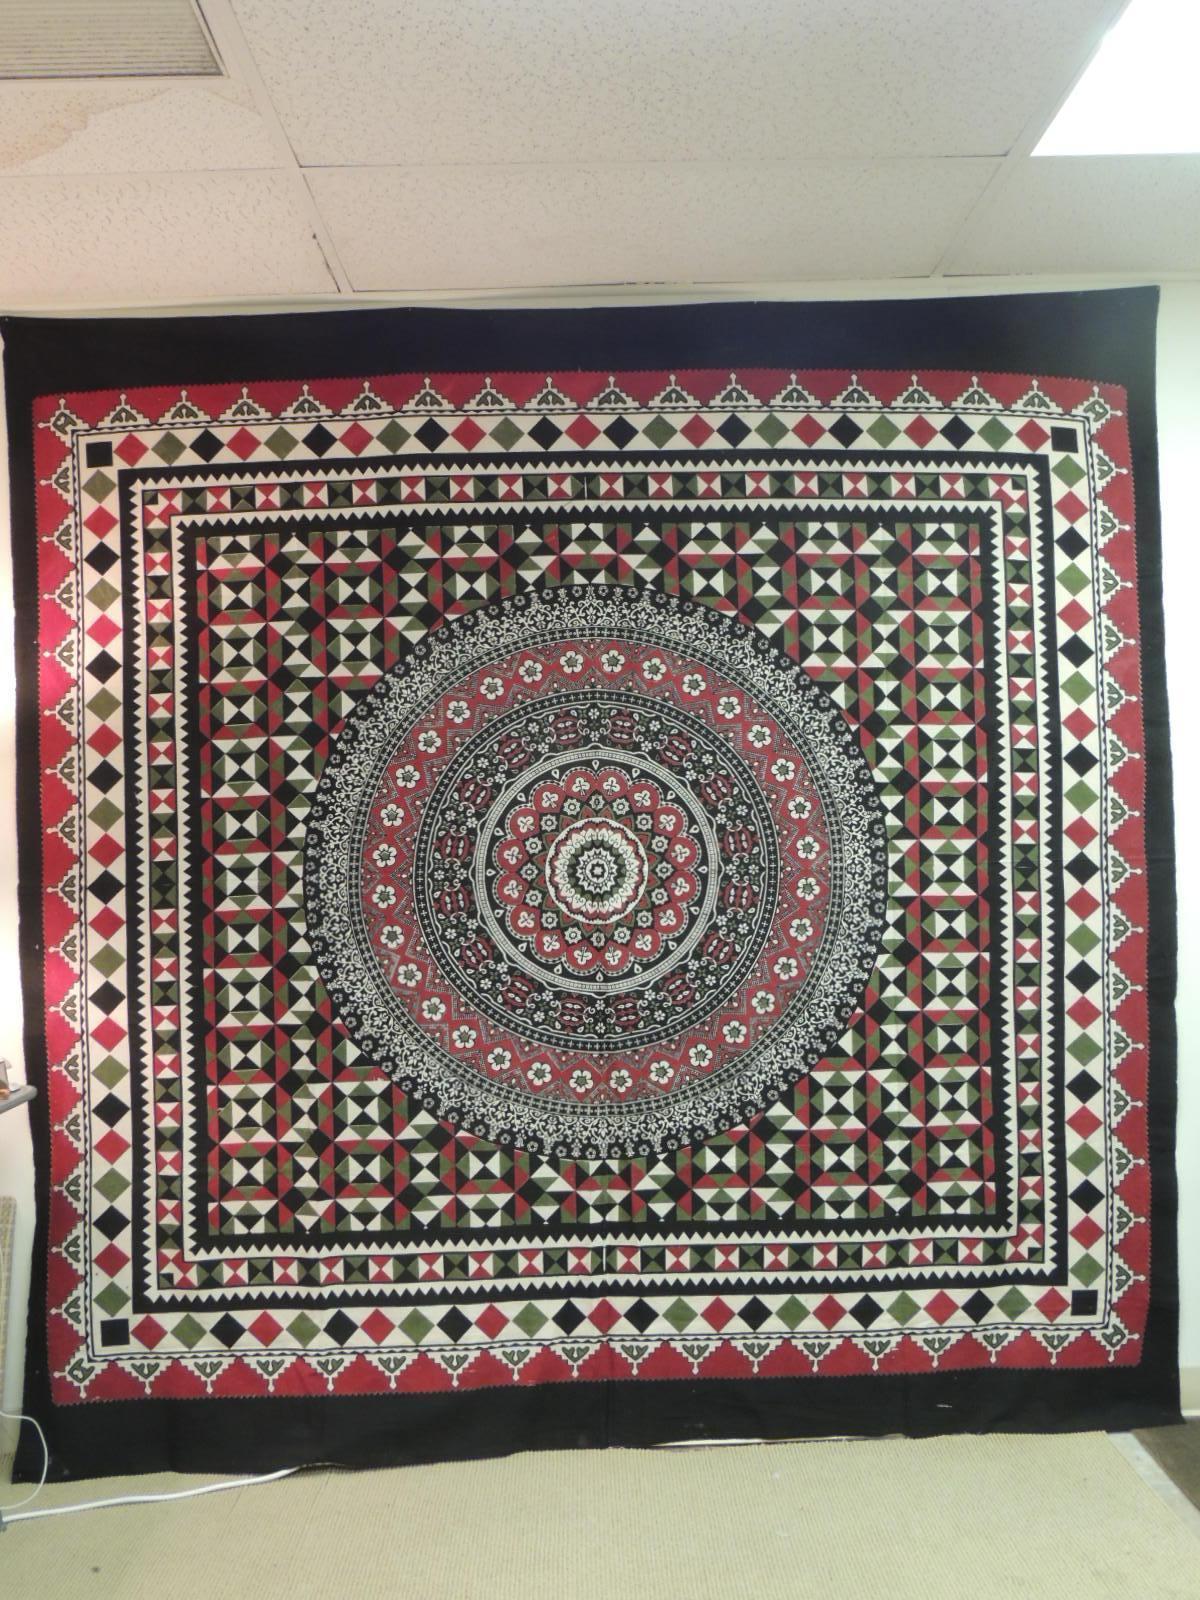 Large Indian Red and Black Hand-Blocked Printed on Cotton Cloth/Bed Cover In Good Condition For Sale In Oakland Park, FL